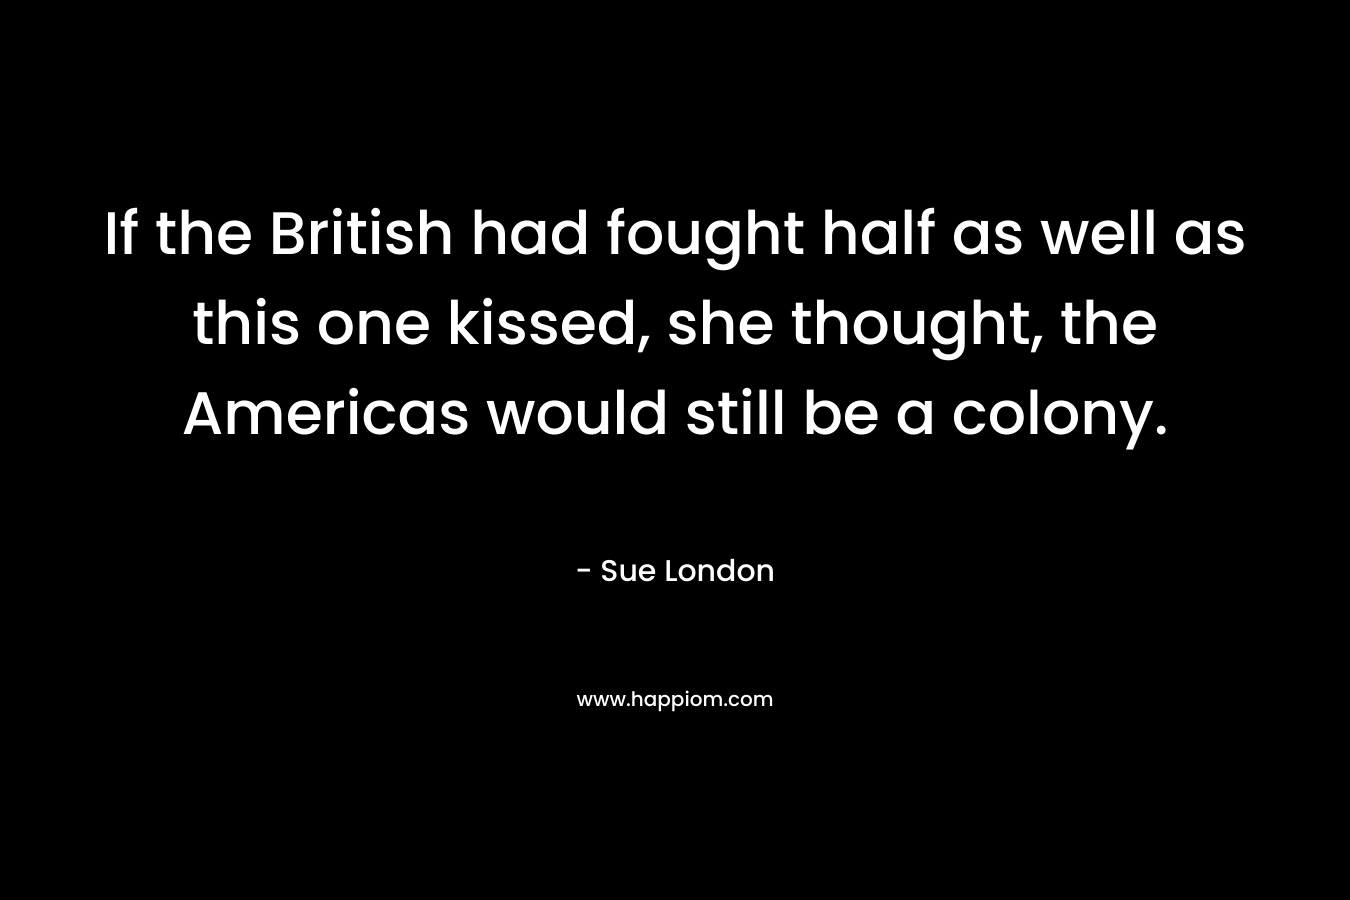 If the British had fought half as well as this one kissed, she thought, the Americas would still be a colony. – Sue London